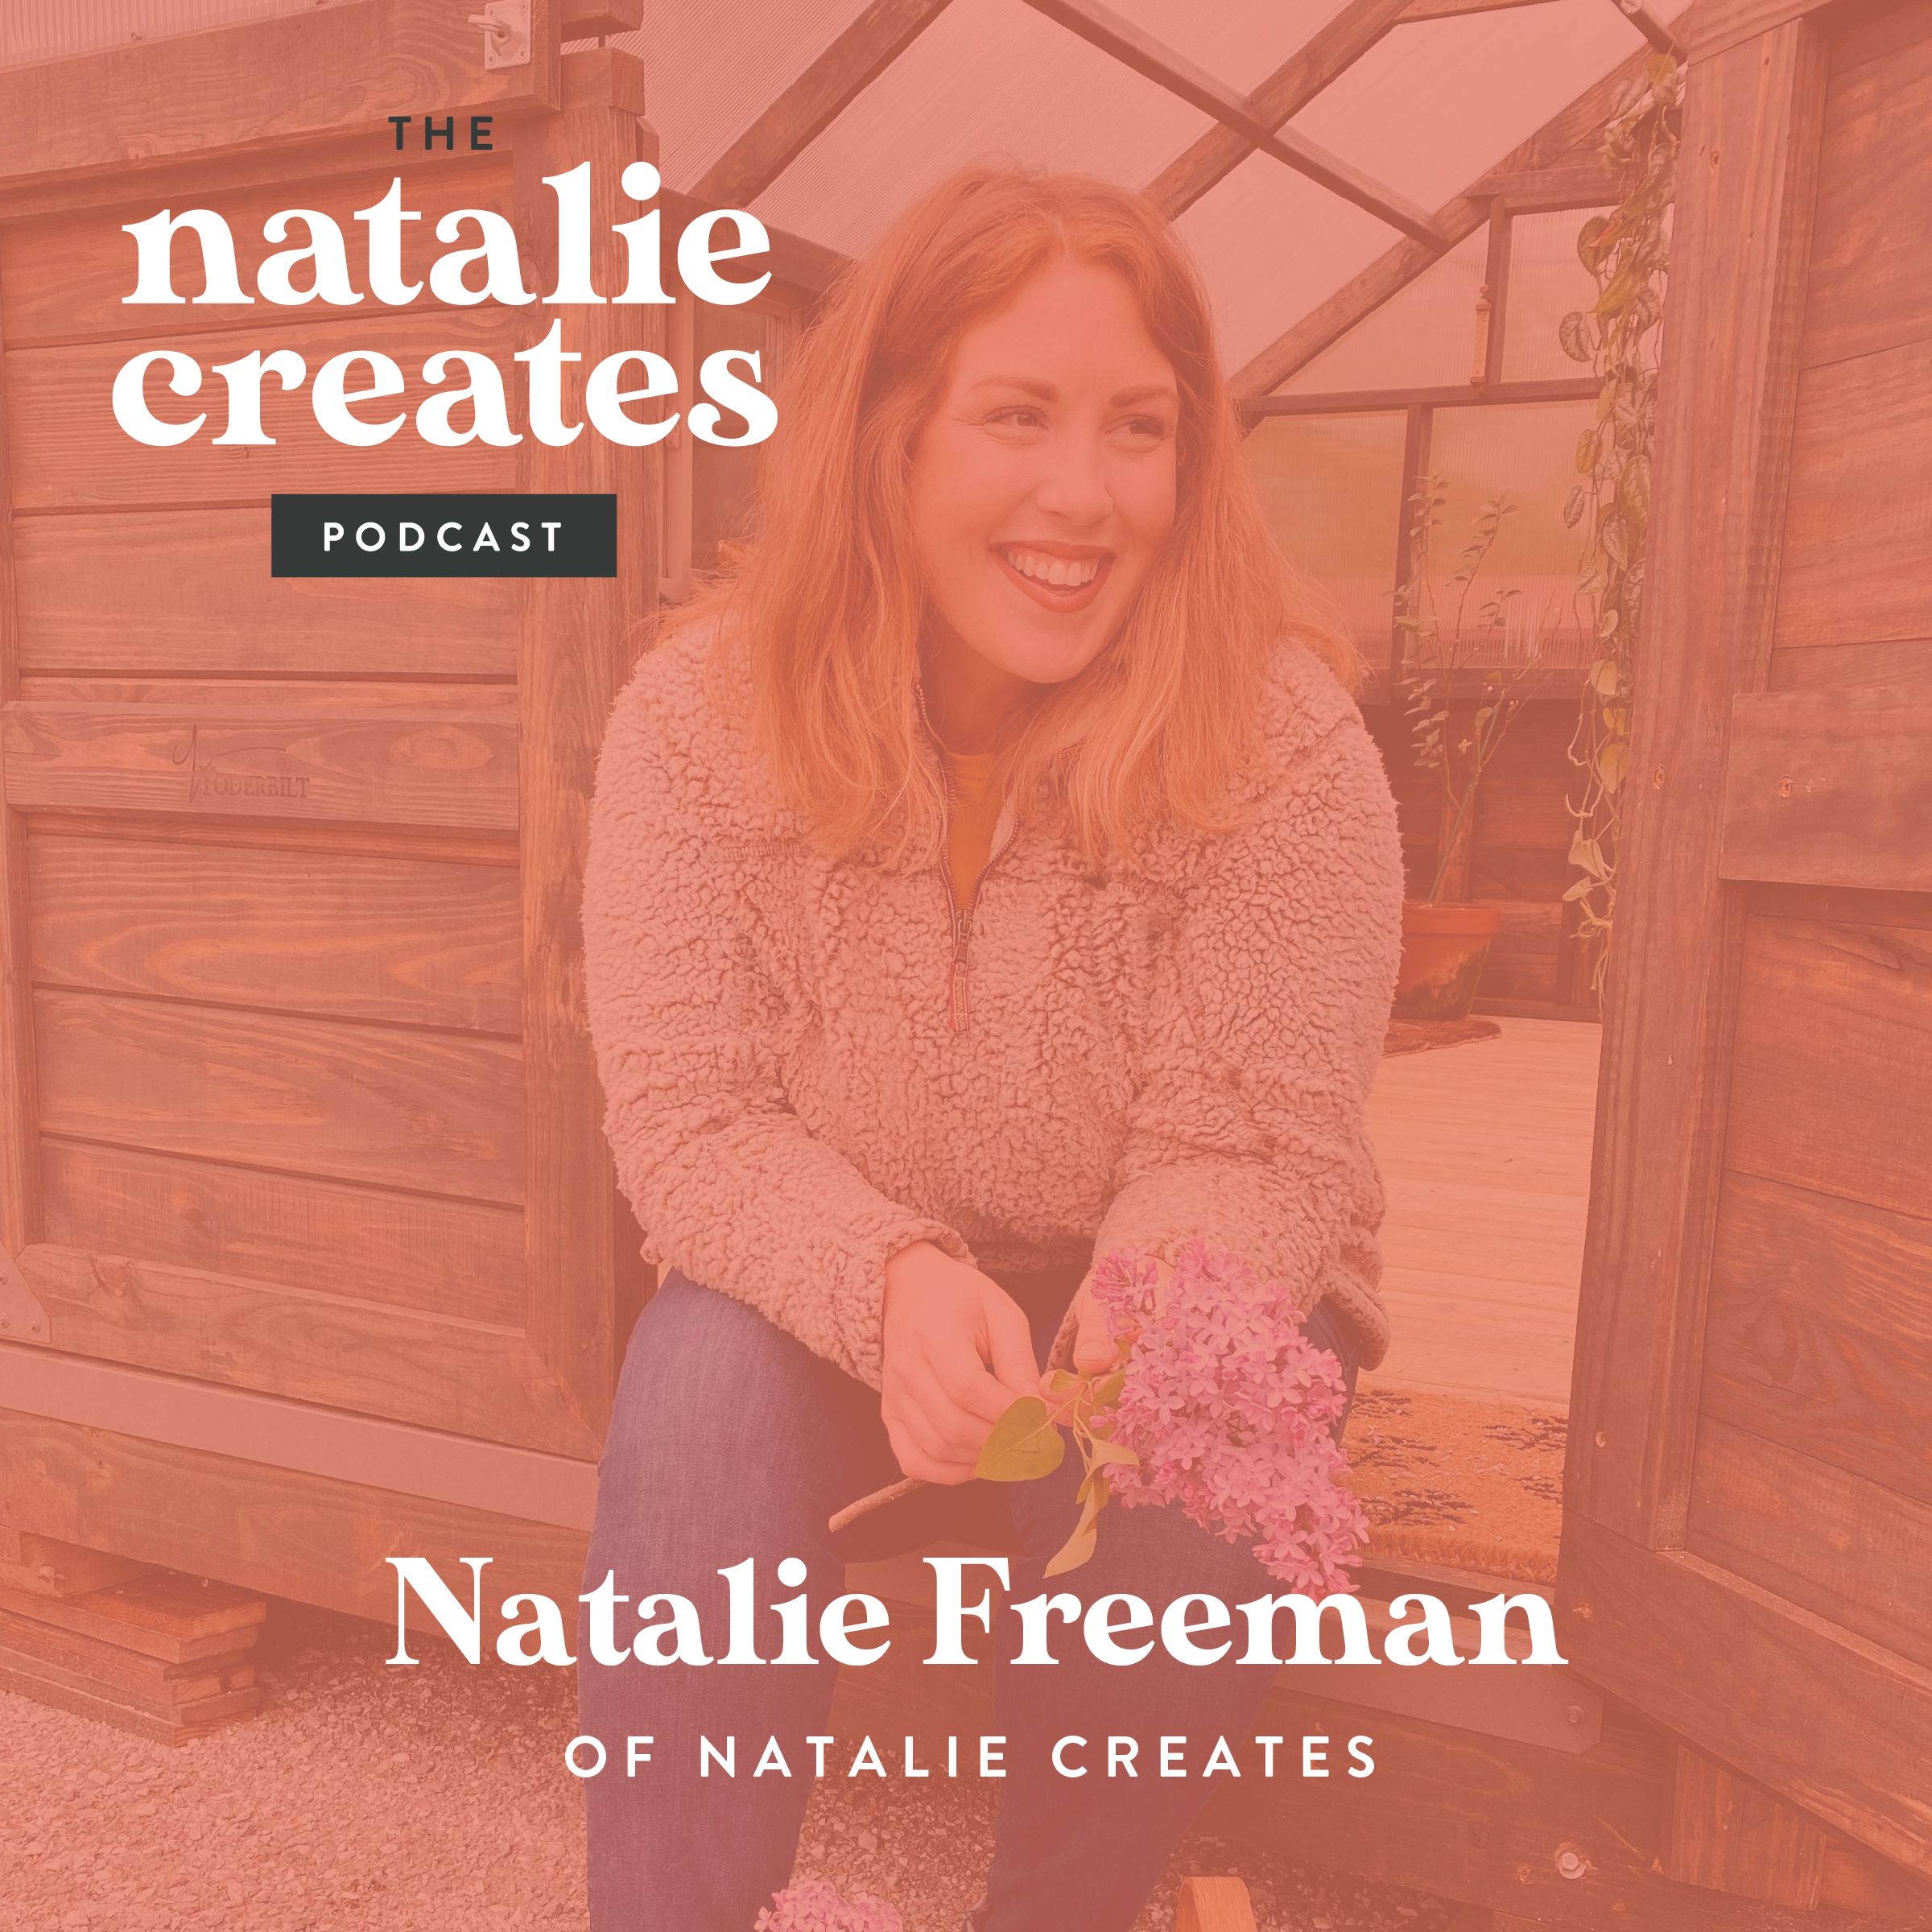 8. Re-Centering Yourself in a Crisis with Natalie